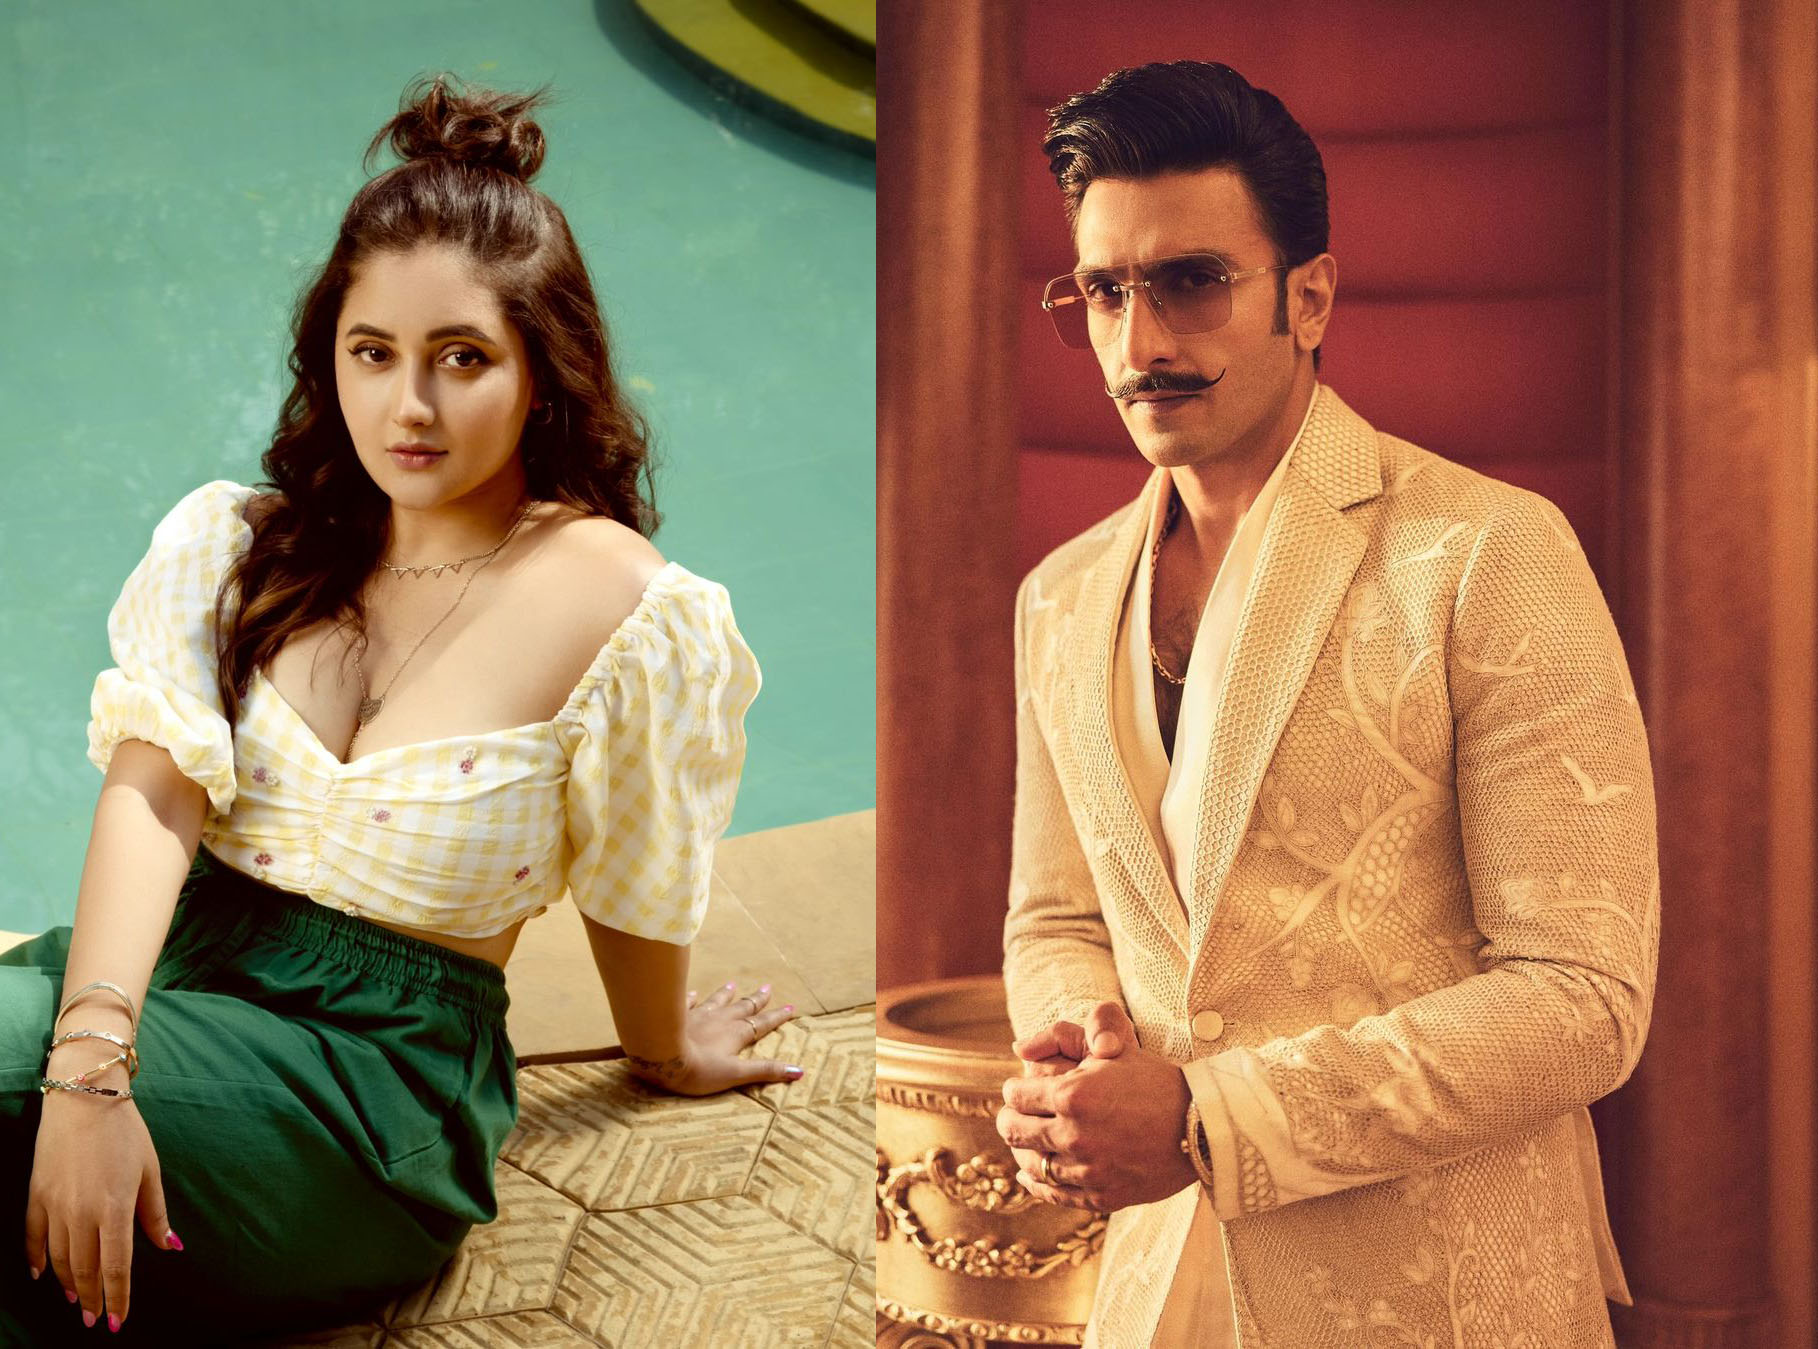 Actress Rashami Desai Slams Ranveer Singh – Johnny Sins. She Wrote, ‘This Is The Most Unexpected Collab Ever To Exist!